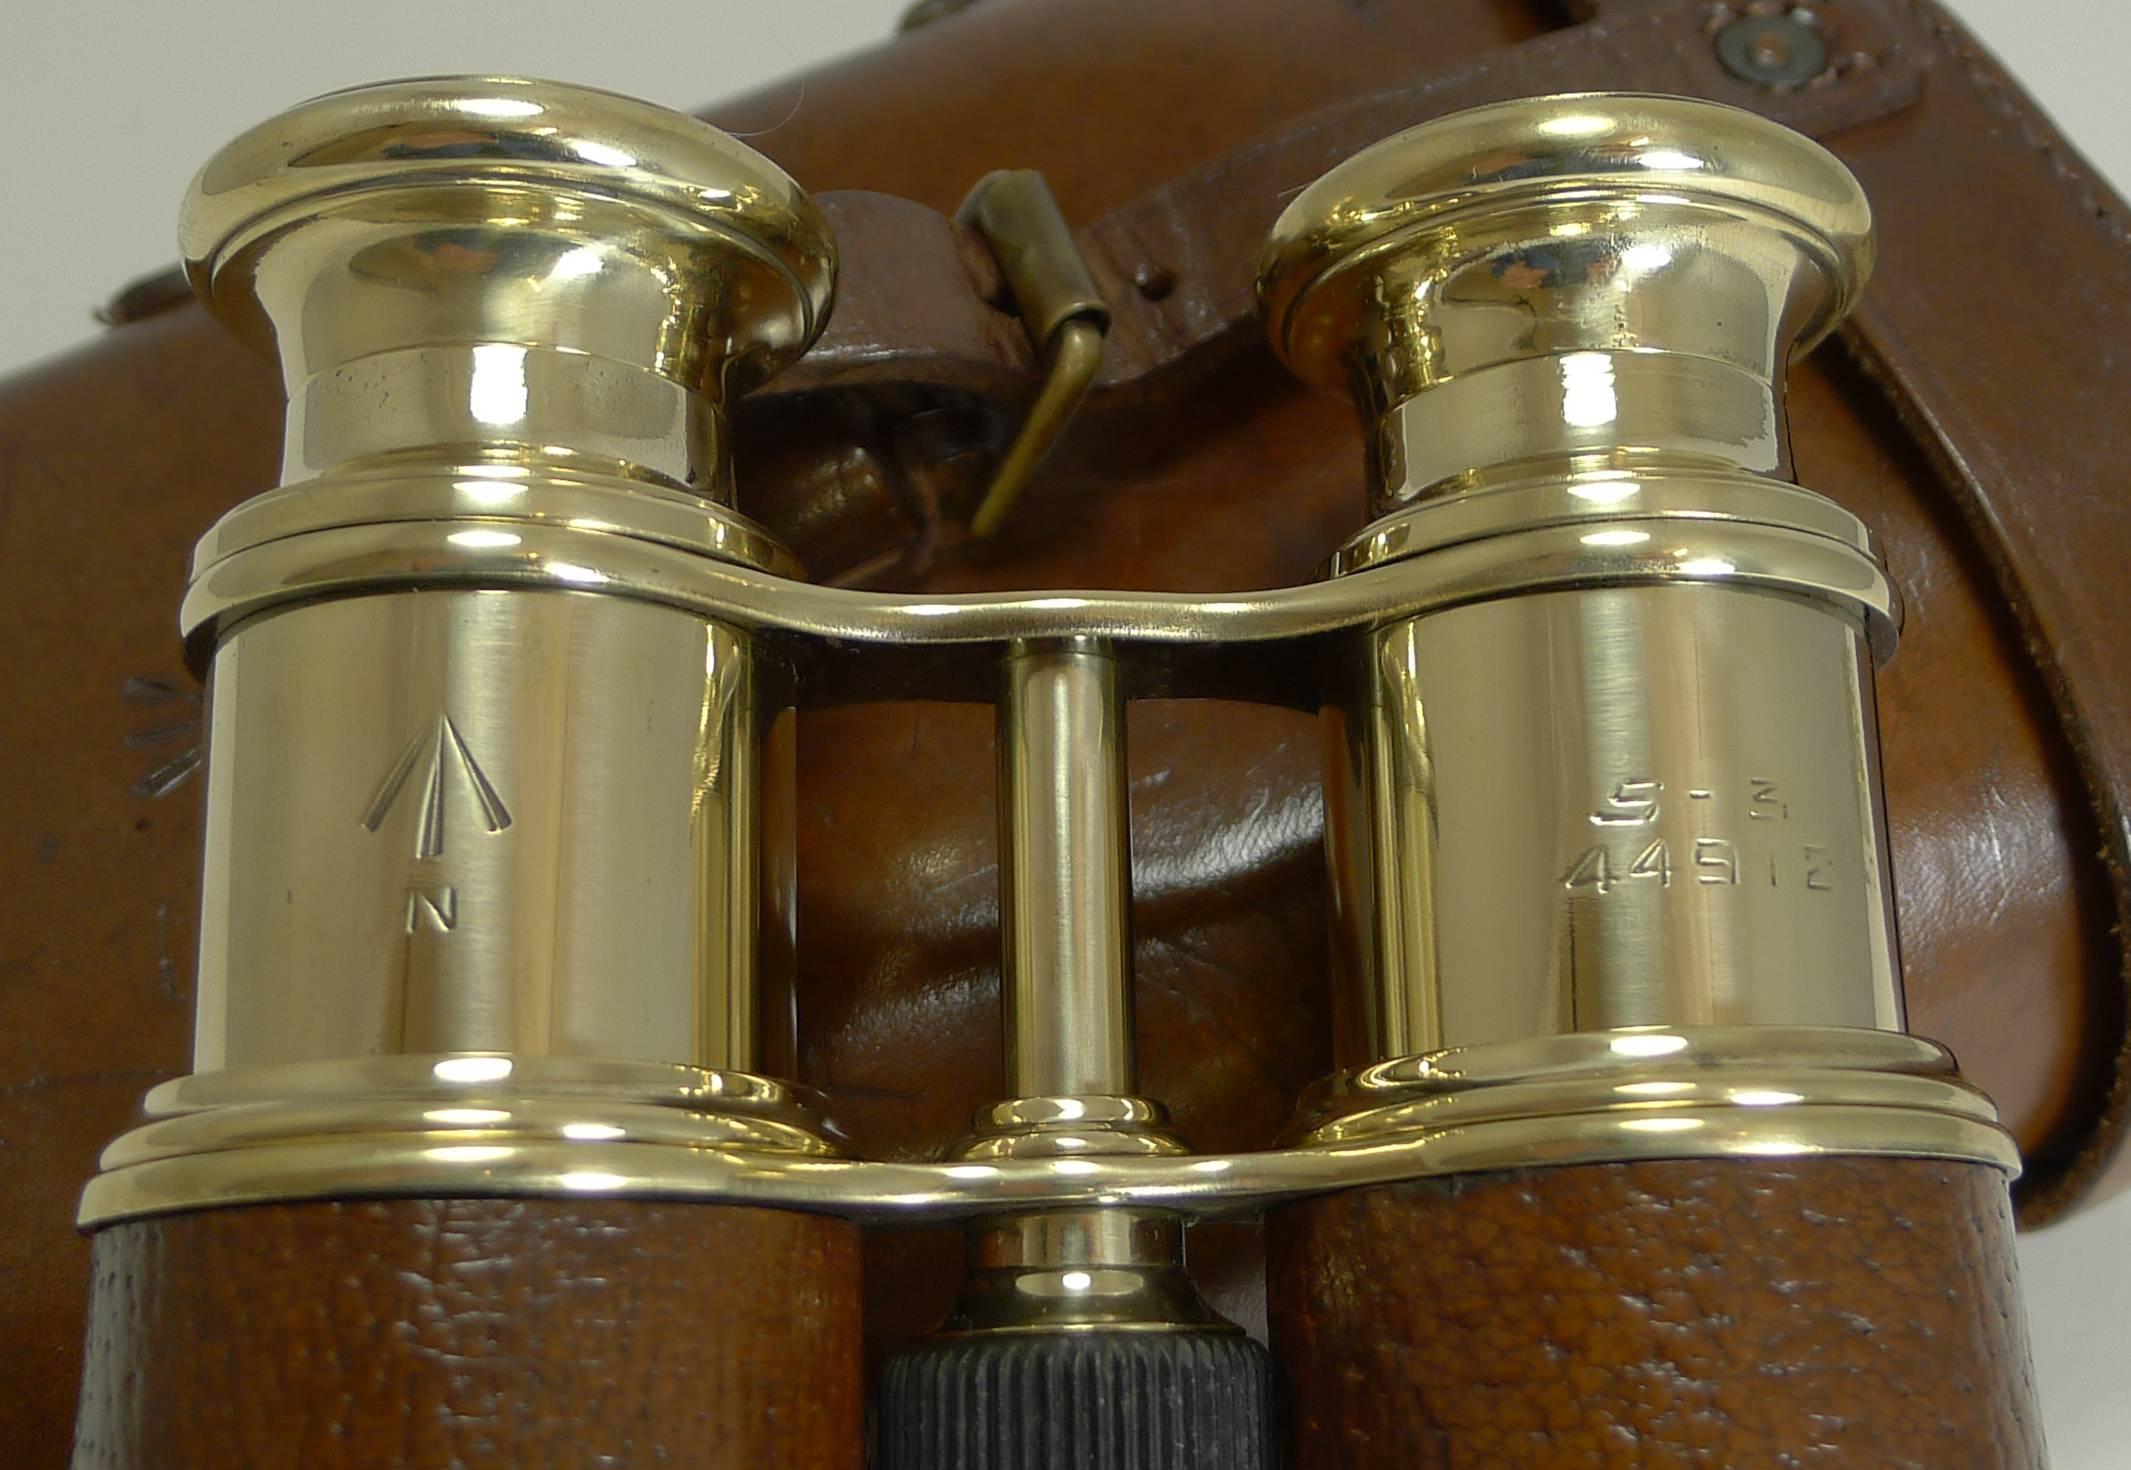 French Superb Pair of WW1 Binoculars and Case, British Officer's Issue, 1916 Signed